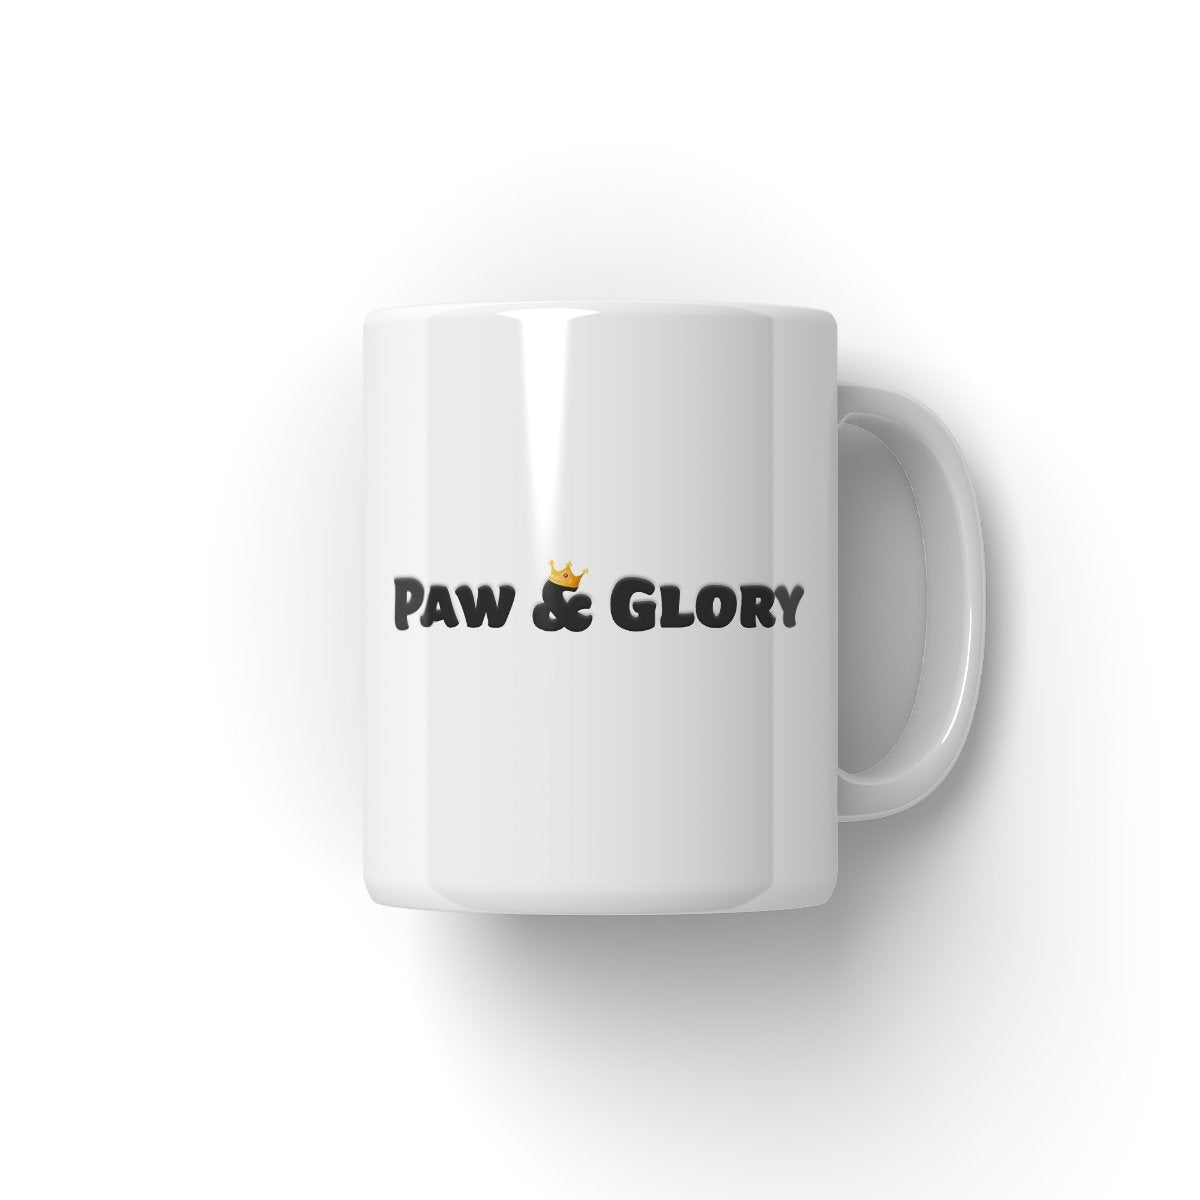 Paw & Glory Products